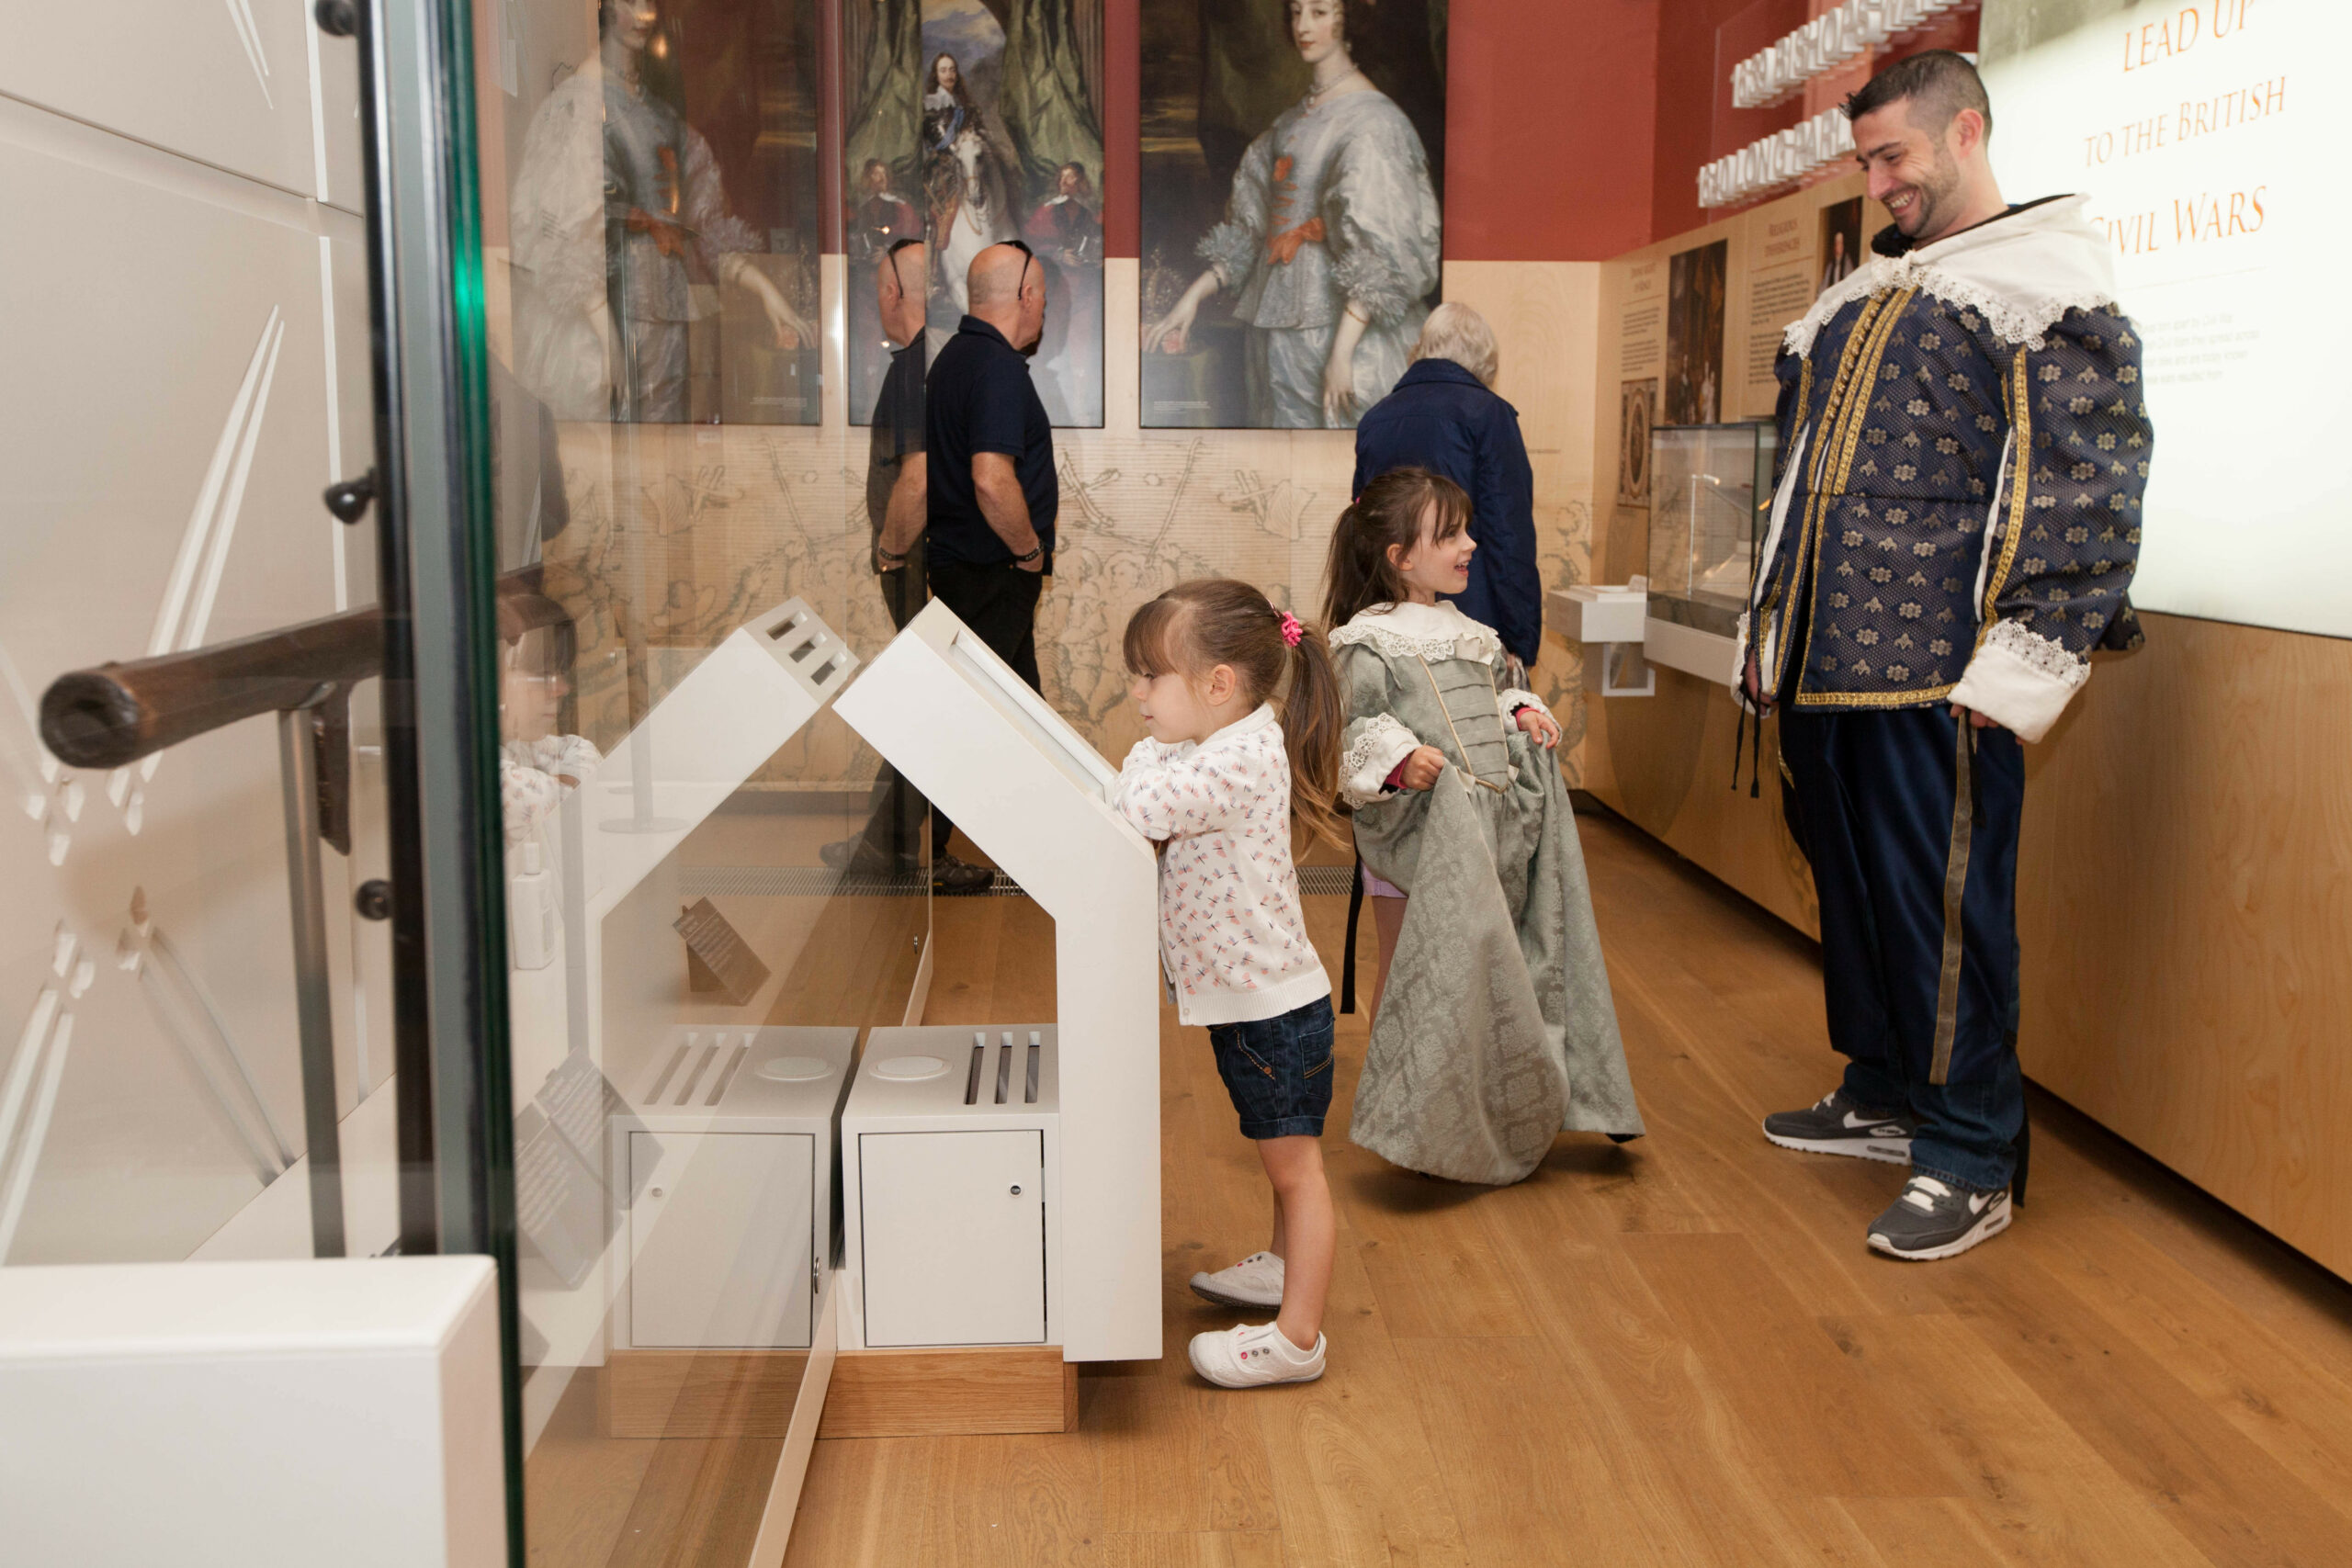 Family visitors in a gallery at the National Civil War Centre. A young girl and an adult are dressed up in historic dress, while a child looks at an interactive screen.